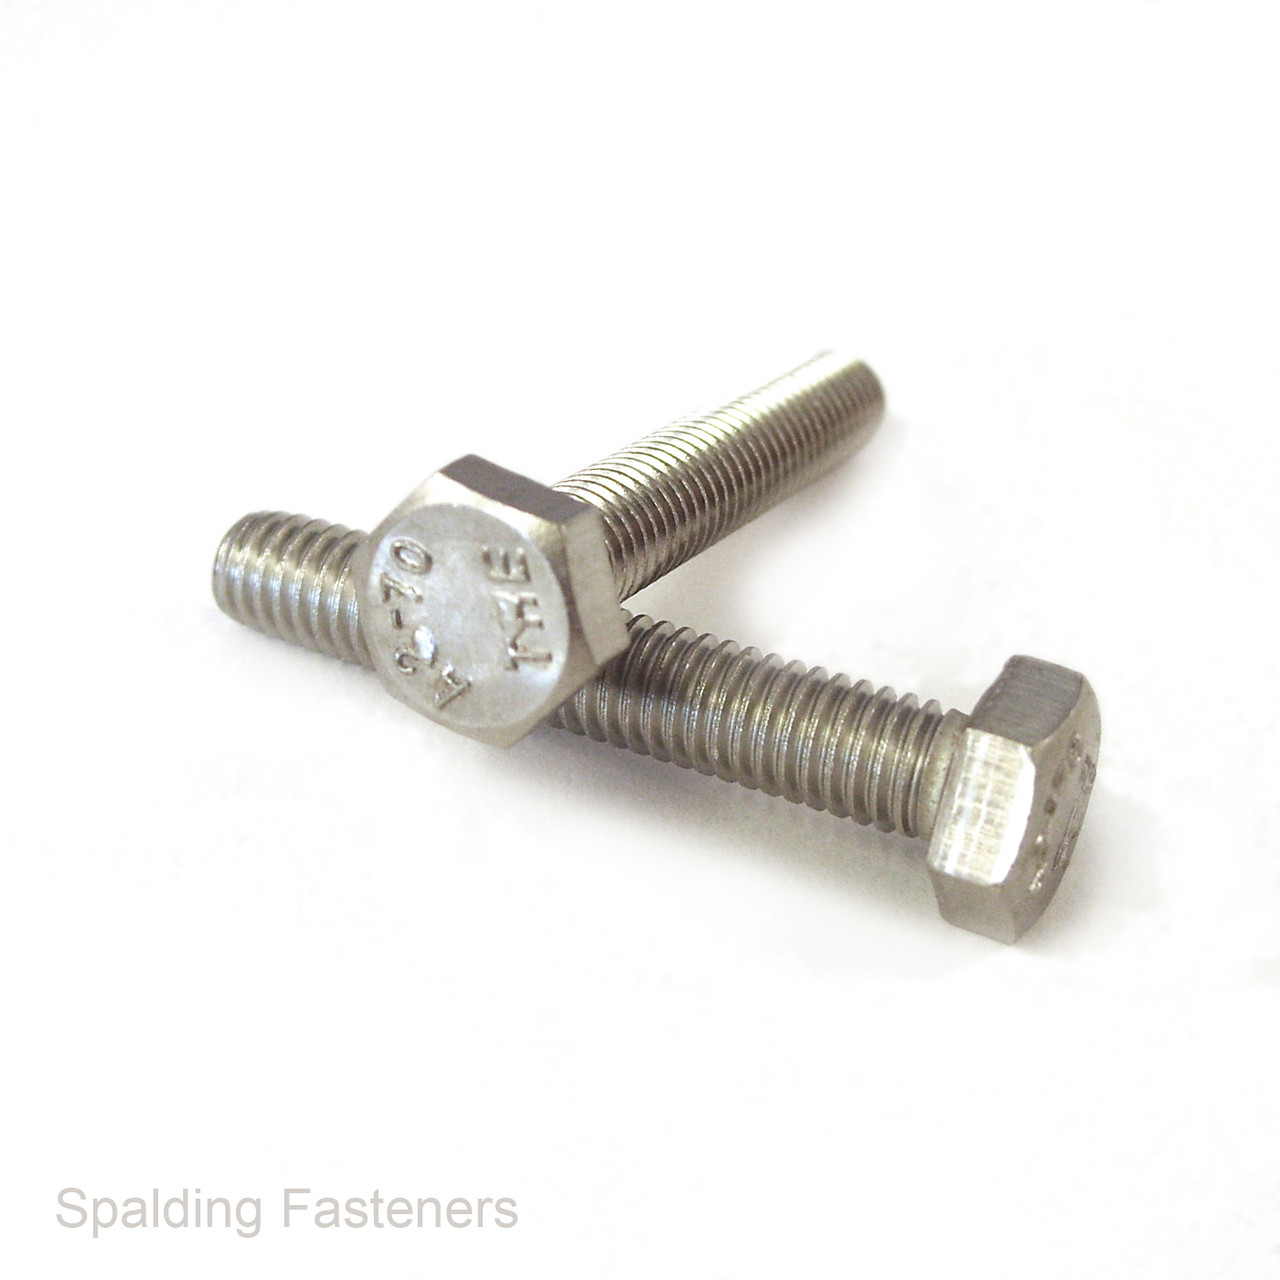 1/4" UNC A2 Grade Stainless Steel Hex Head Set Screw Fully Threaded Bolts